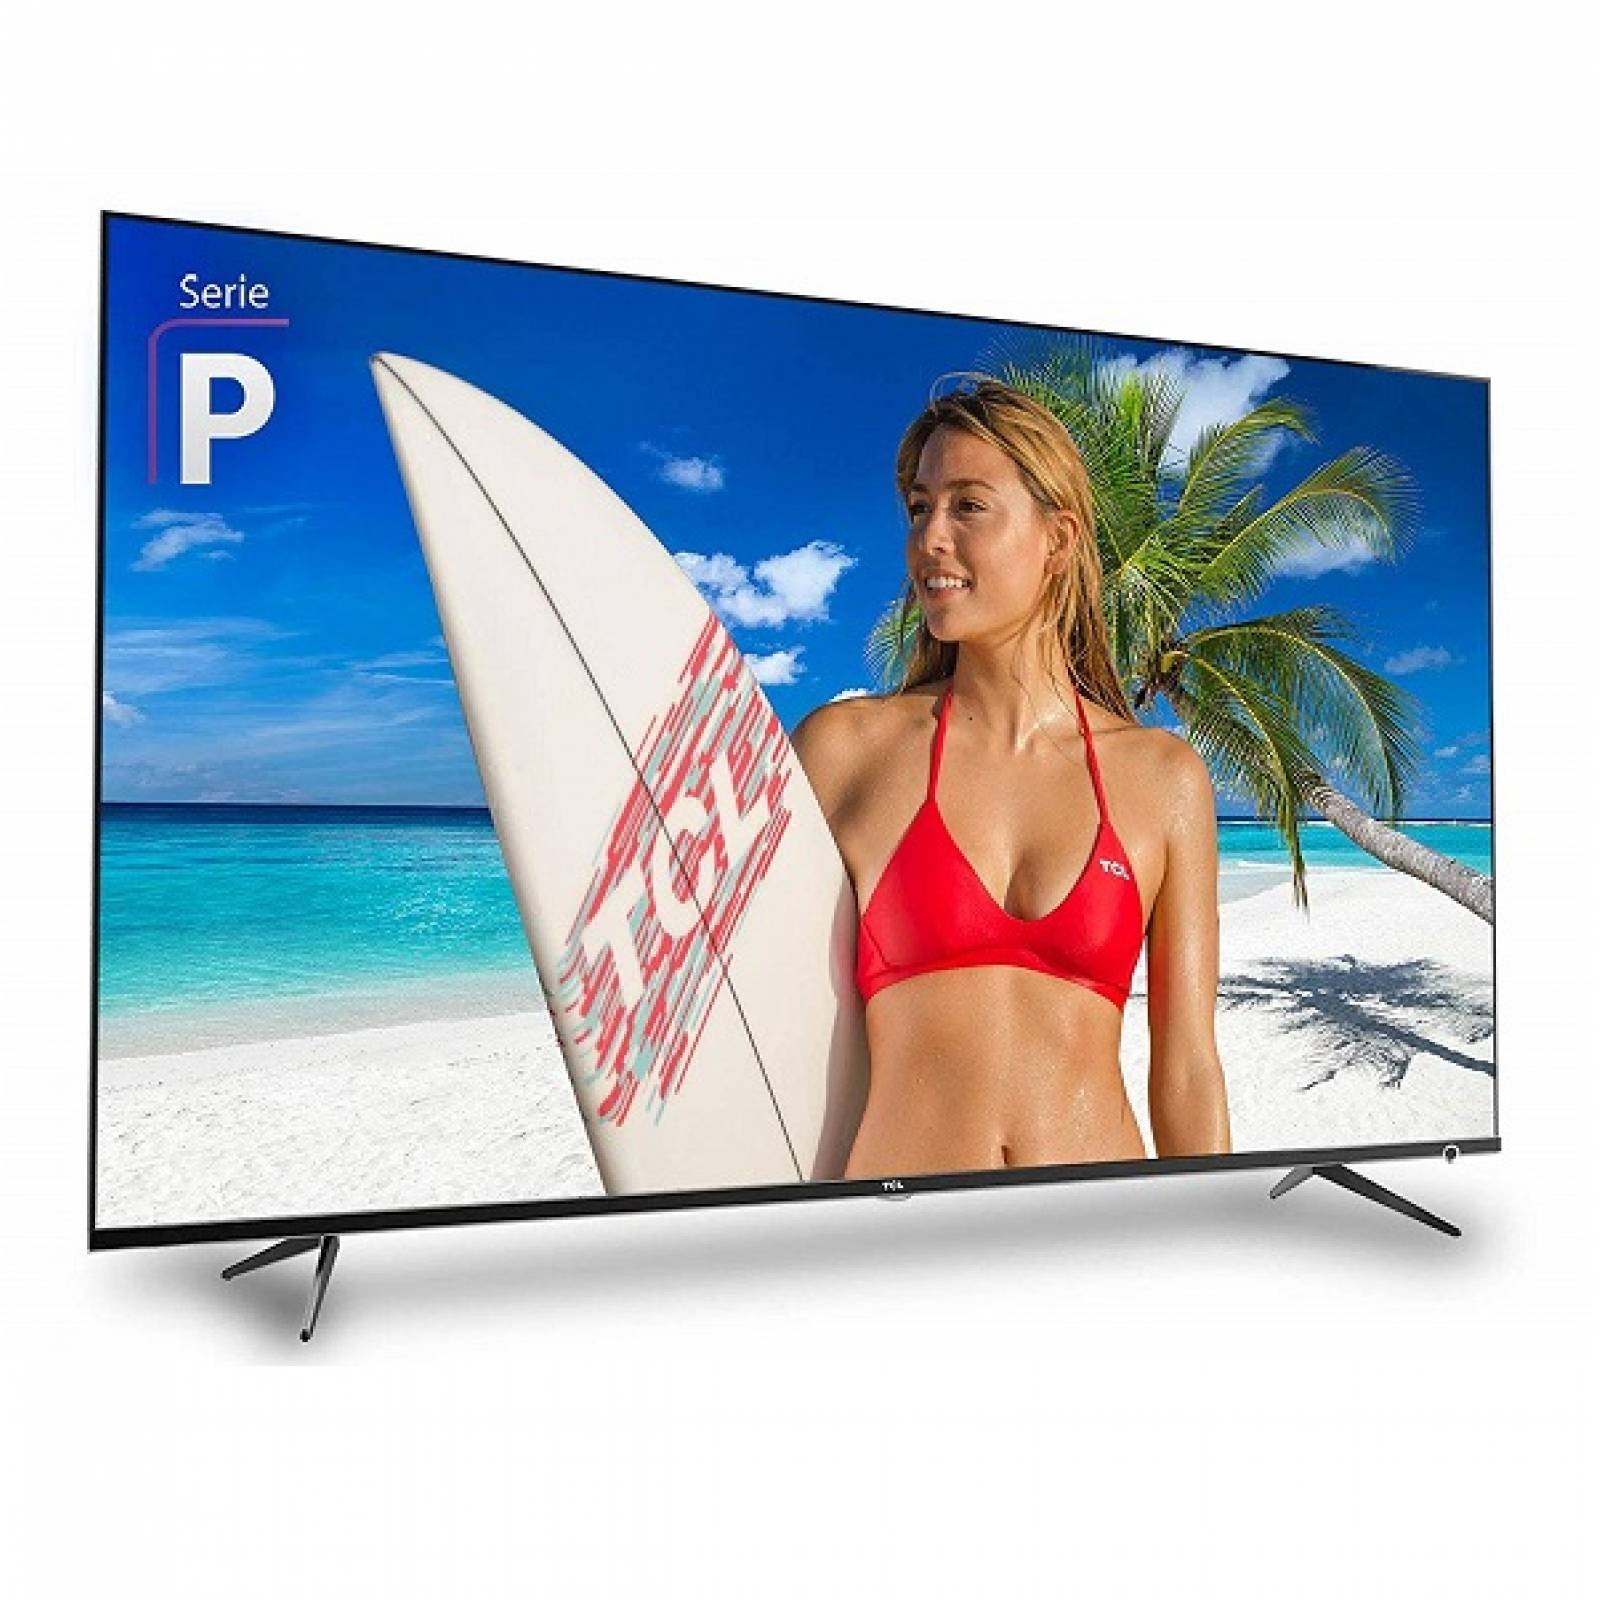 Smart TV TCL Dolby digital audio HDR HDMI USB 65P612